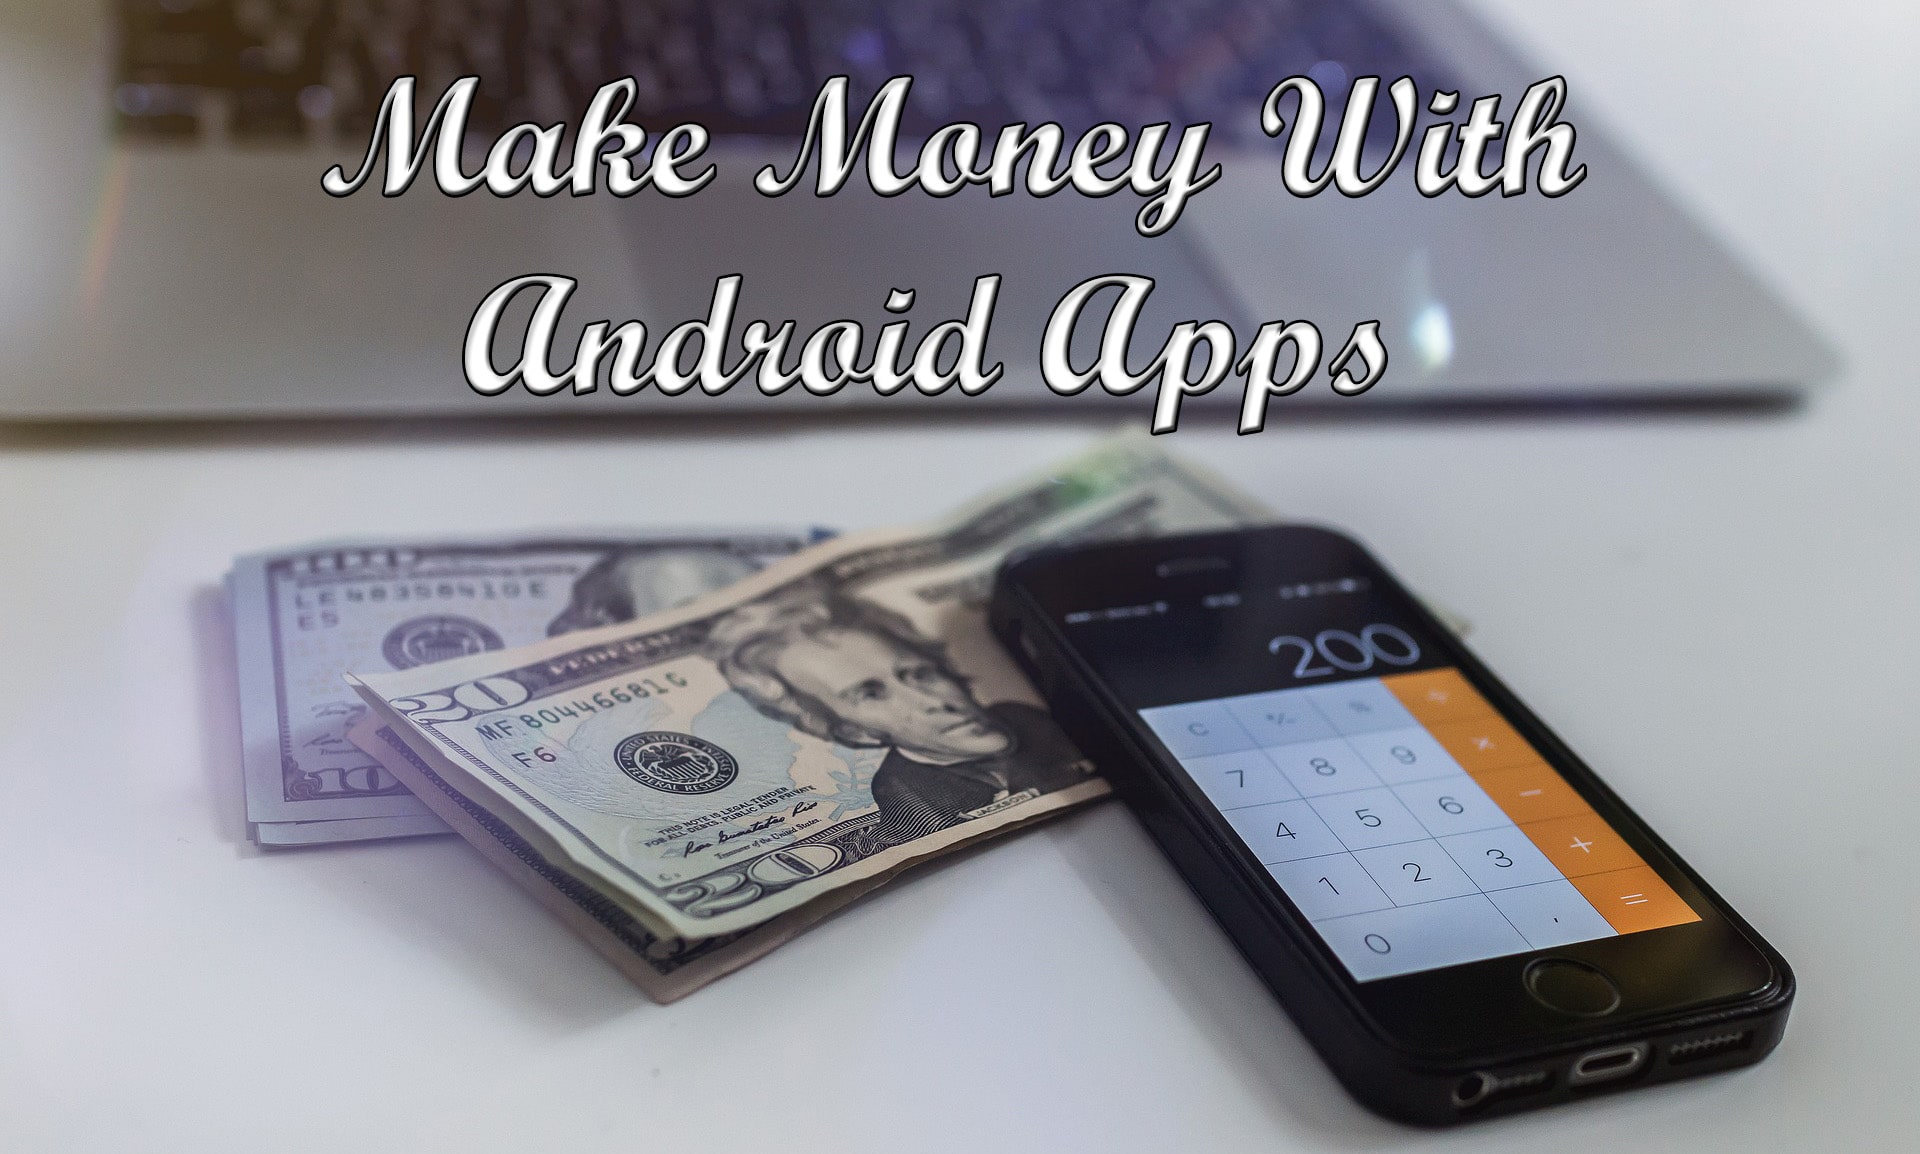 Make Money With Android Apps